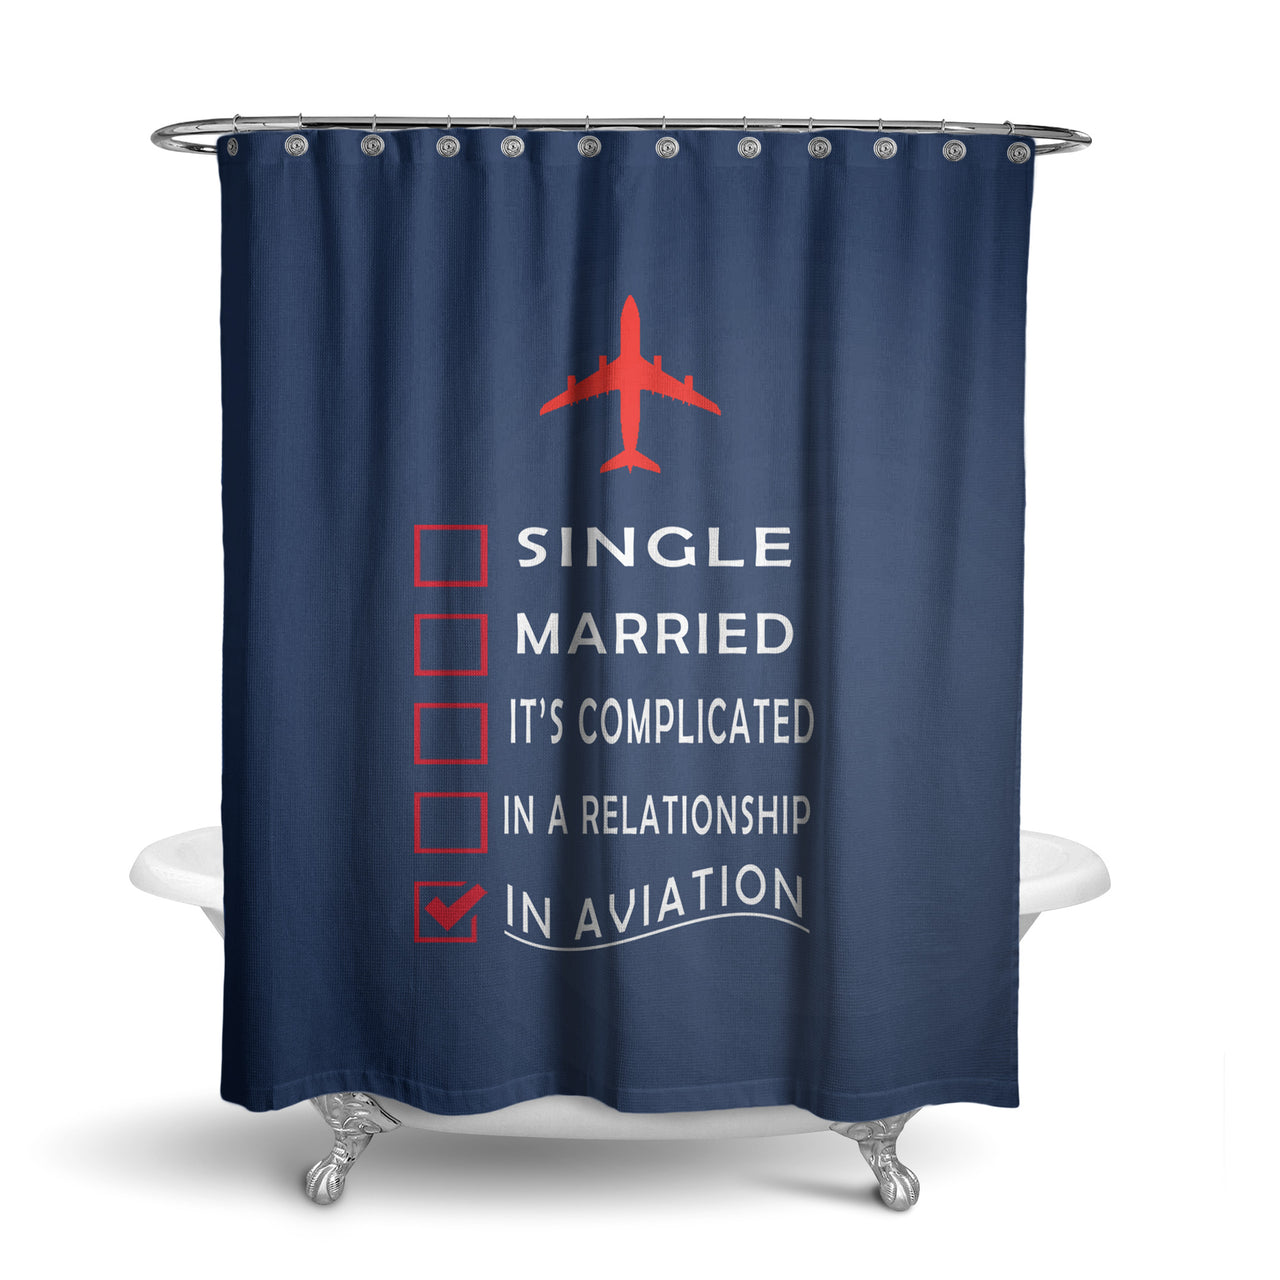 If You're Cool You're Probably a Pilot Designed Shower Curtains